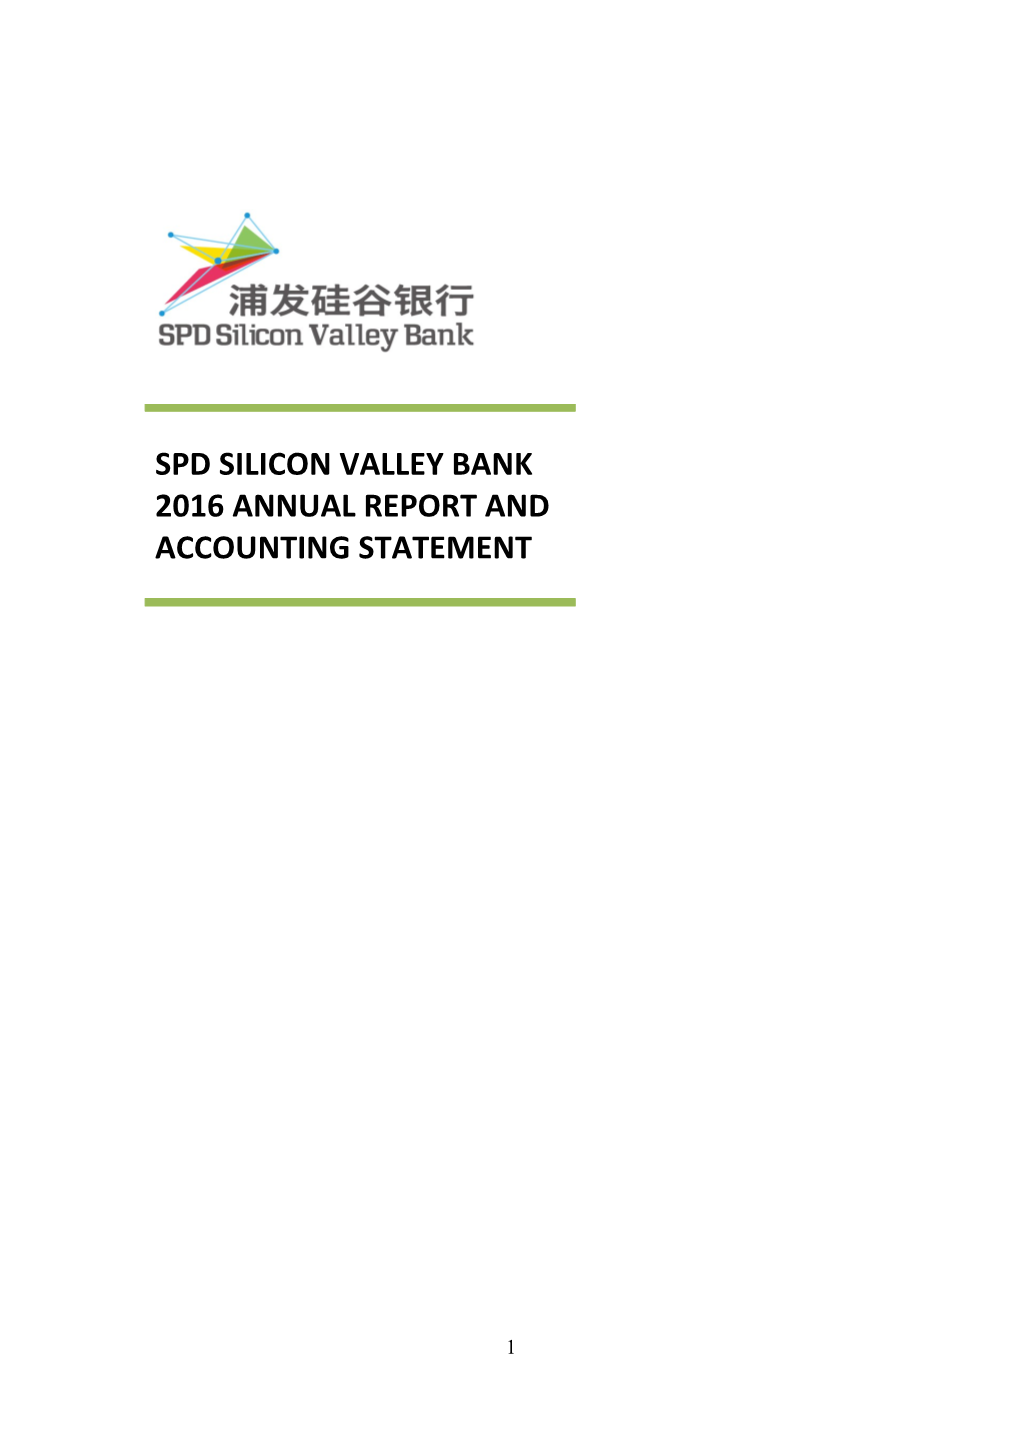 Spd Silicon Valley Bank 2016 Annual Report and Accounting Statement